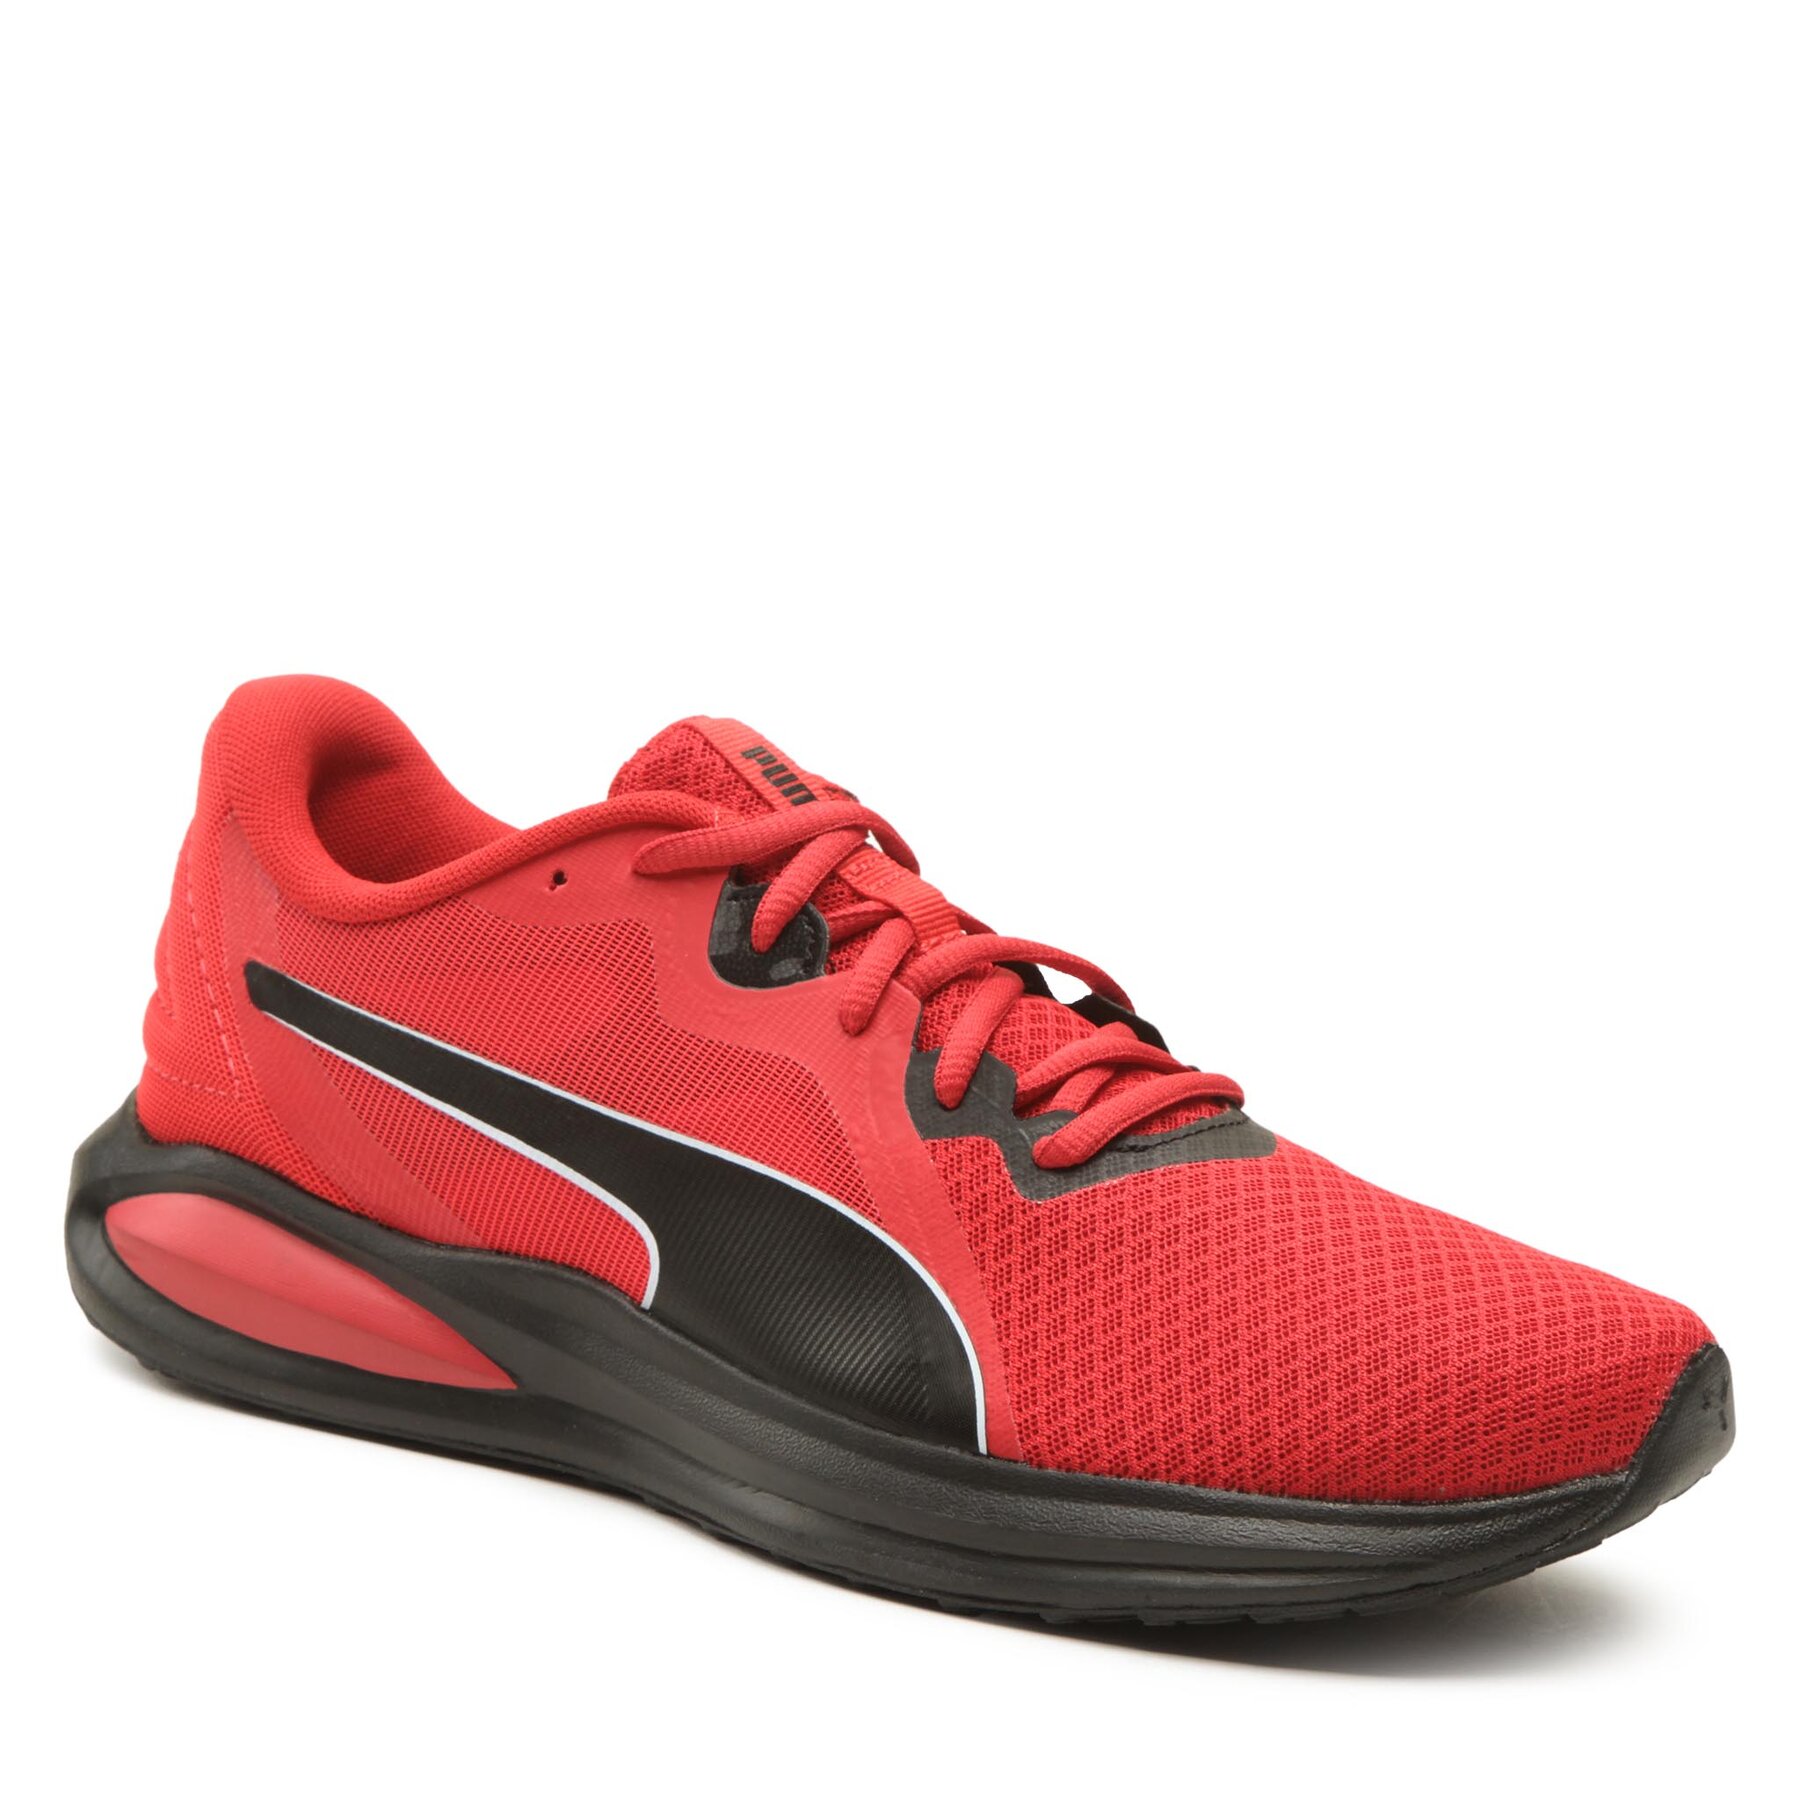 Pantofi Puma Twitch Runner Fresh 377981 04 For All Time Red/Black/White 377981 imagine 2022 reducere